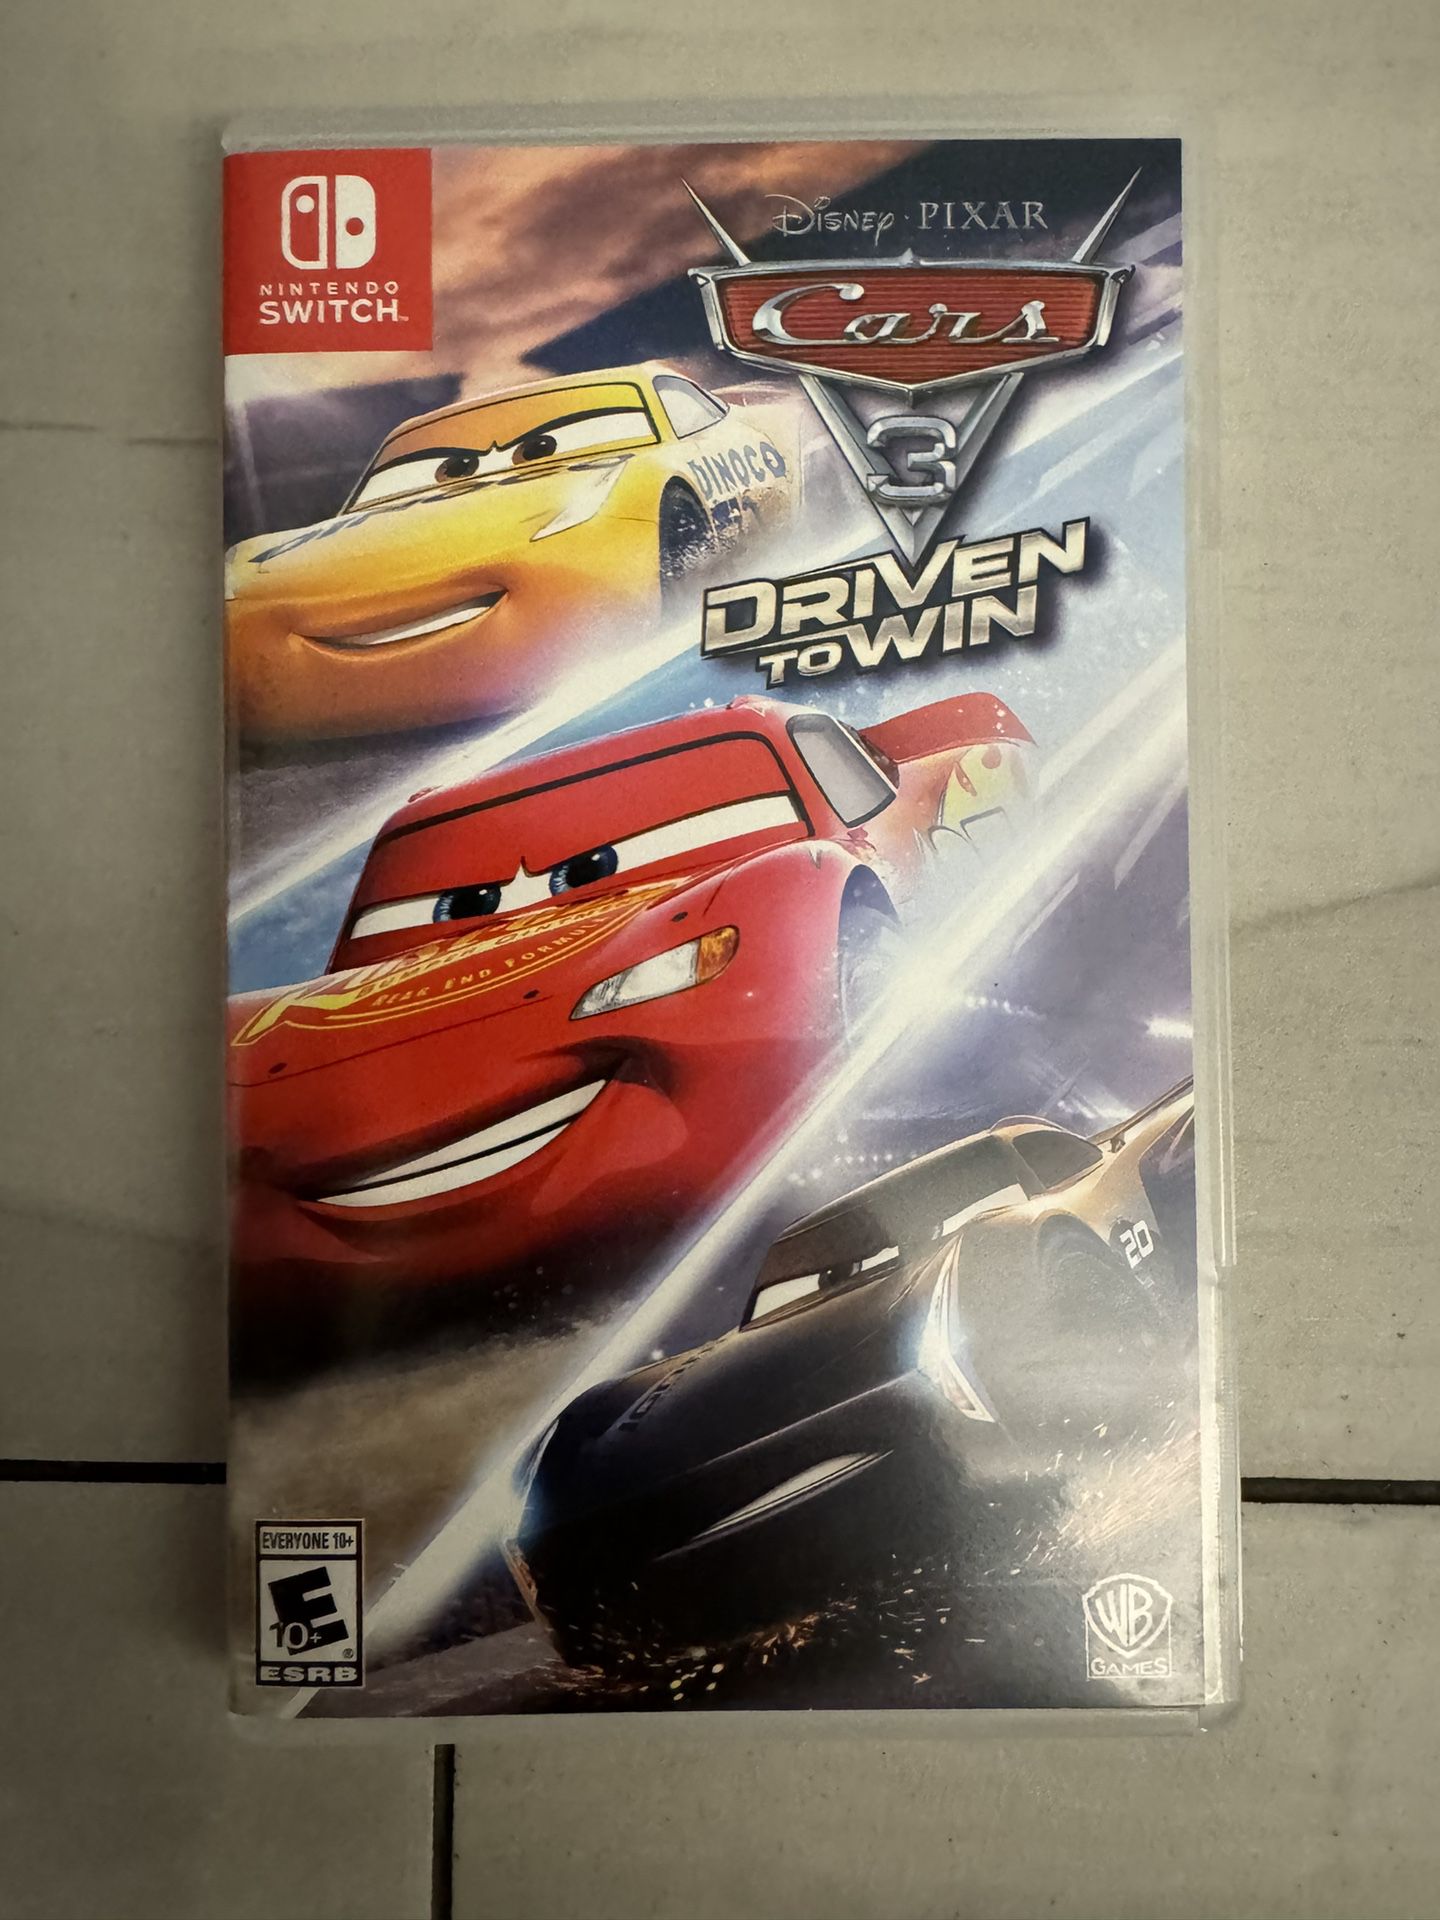 Nintendo Switch Cars 3 Driven to Win Video Game